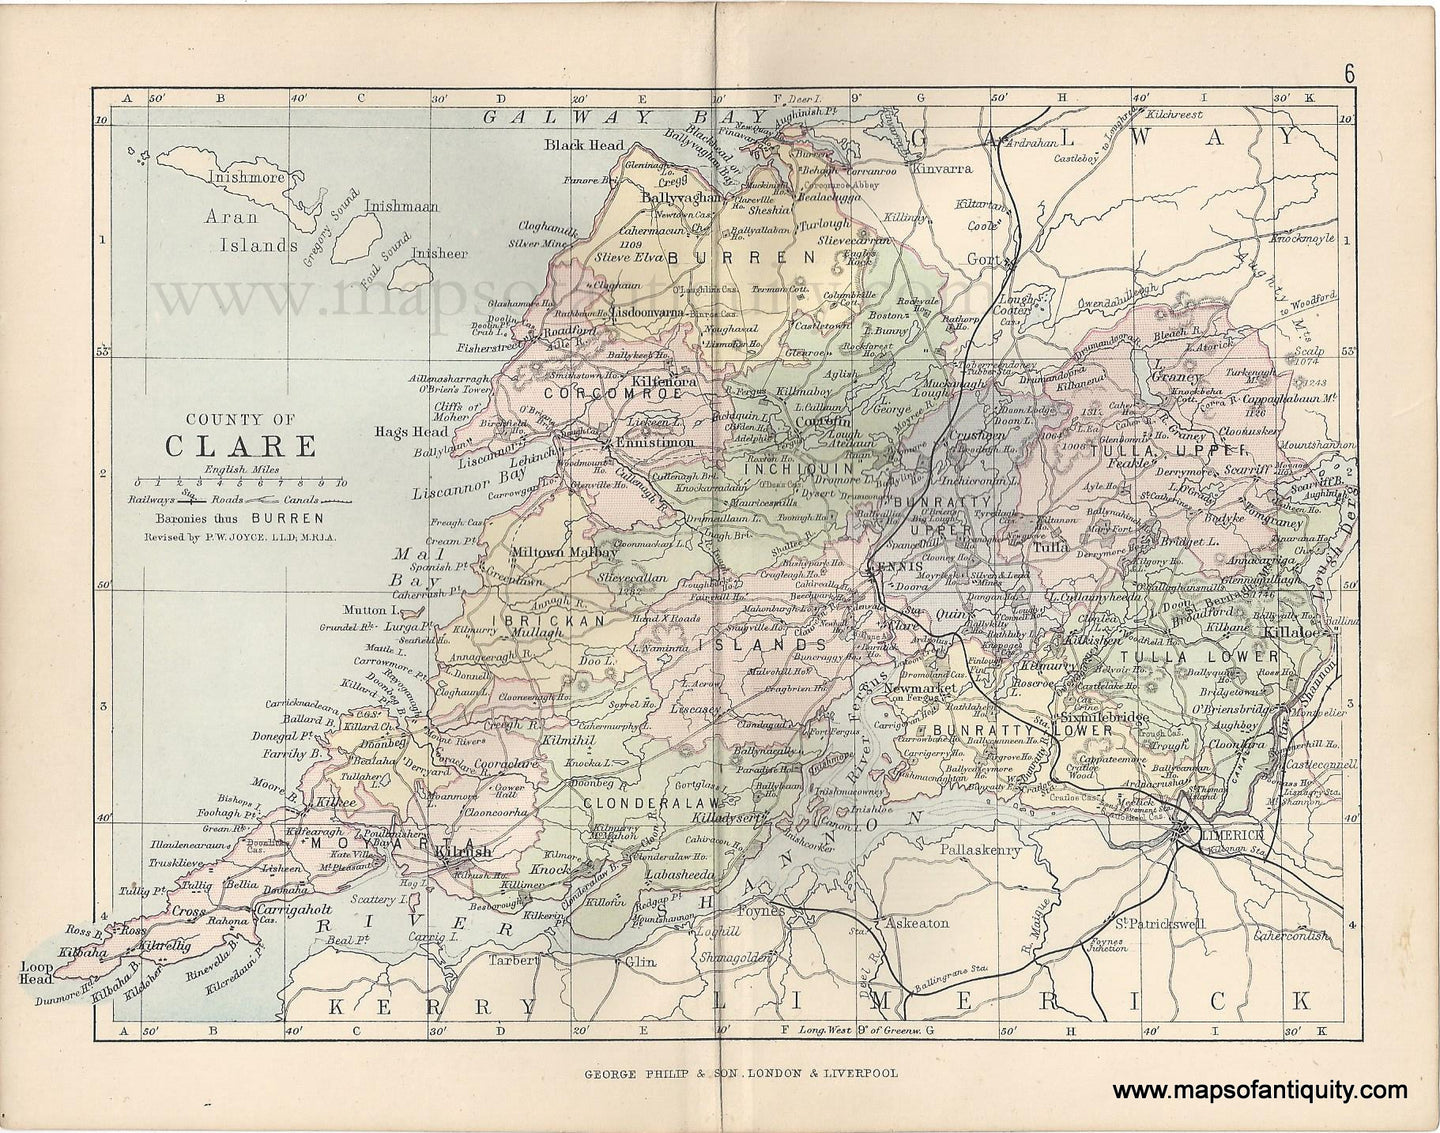 Genuine-Antique-Map-Ireland-County-of-Clare-1884-George-Philip-&-Son-Maps-Of-Antiquity